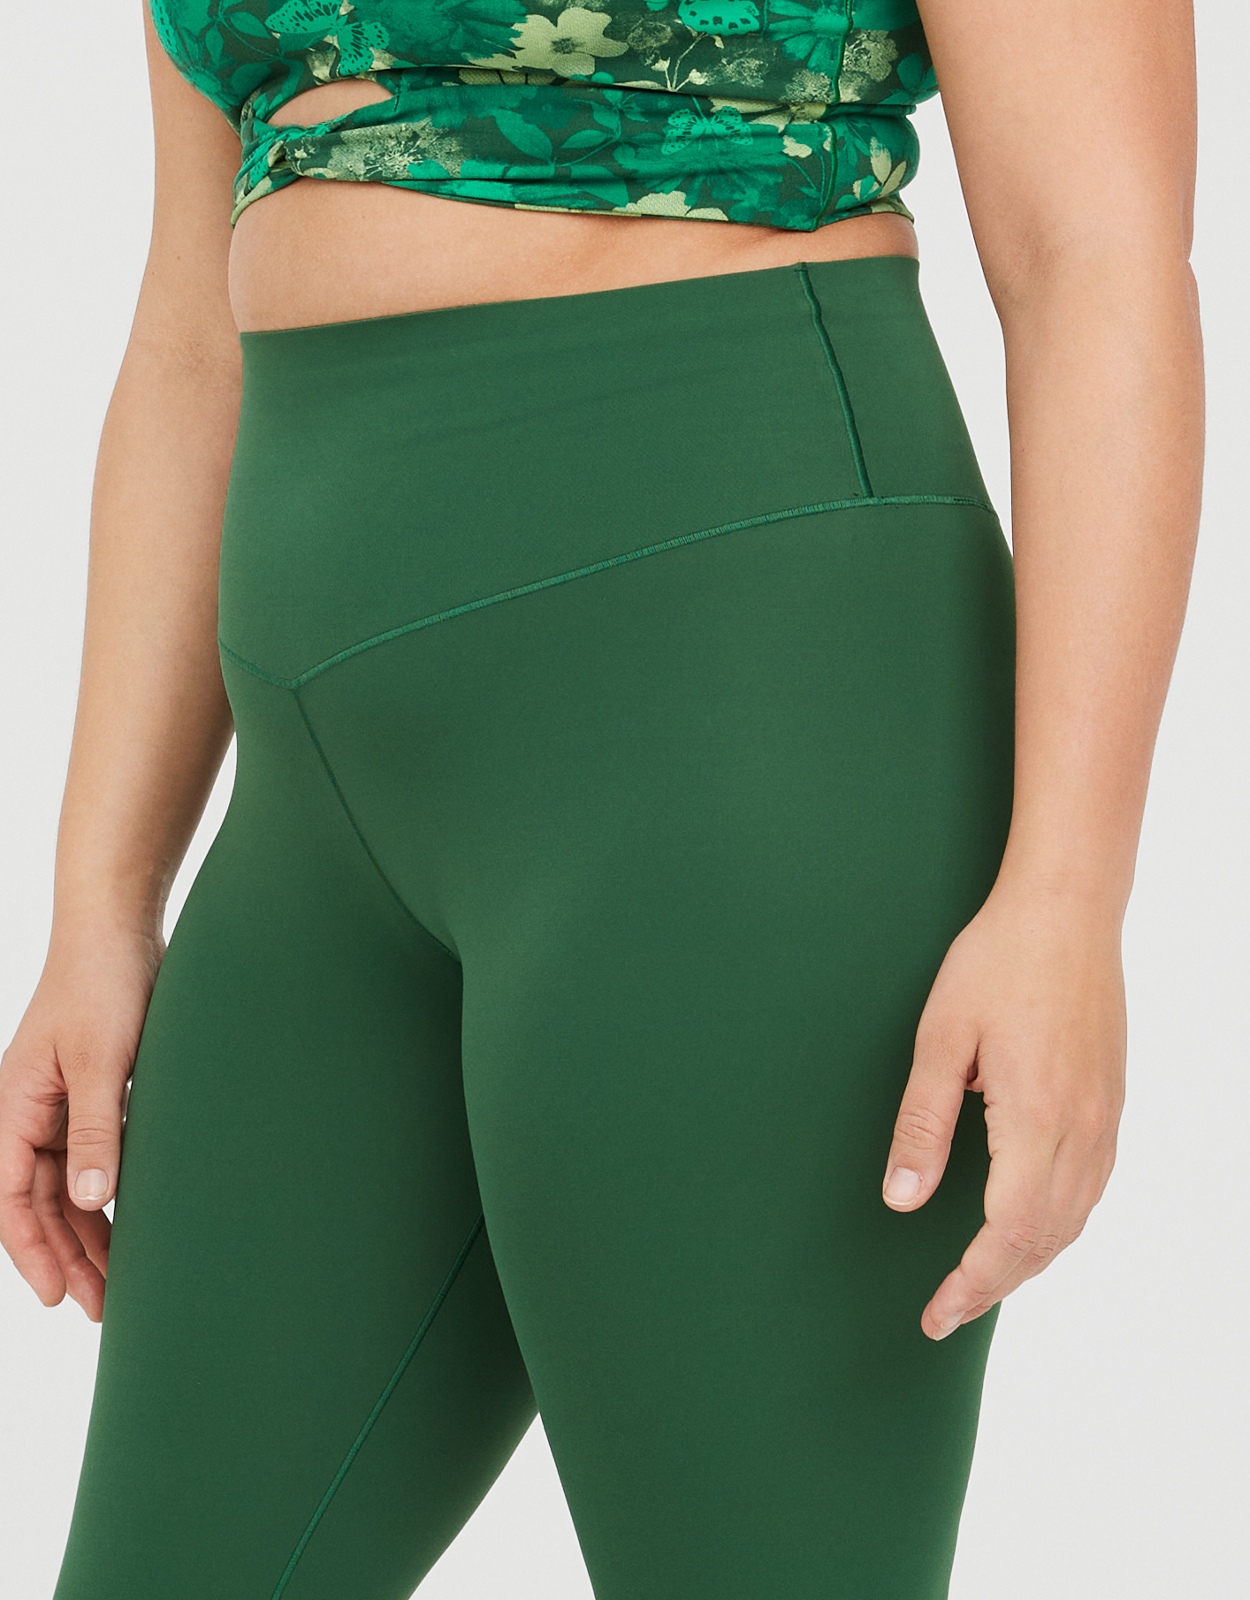 Buy OFFLINE By Aerie Hold Up! Real Me Xtra Legging online